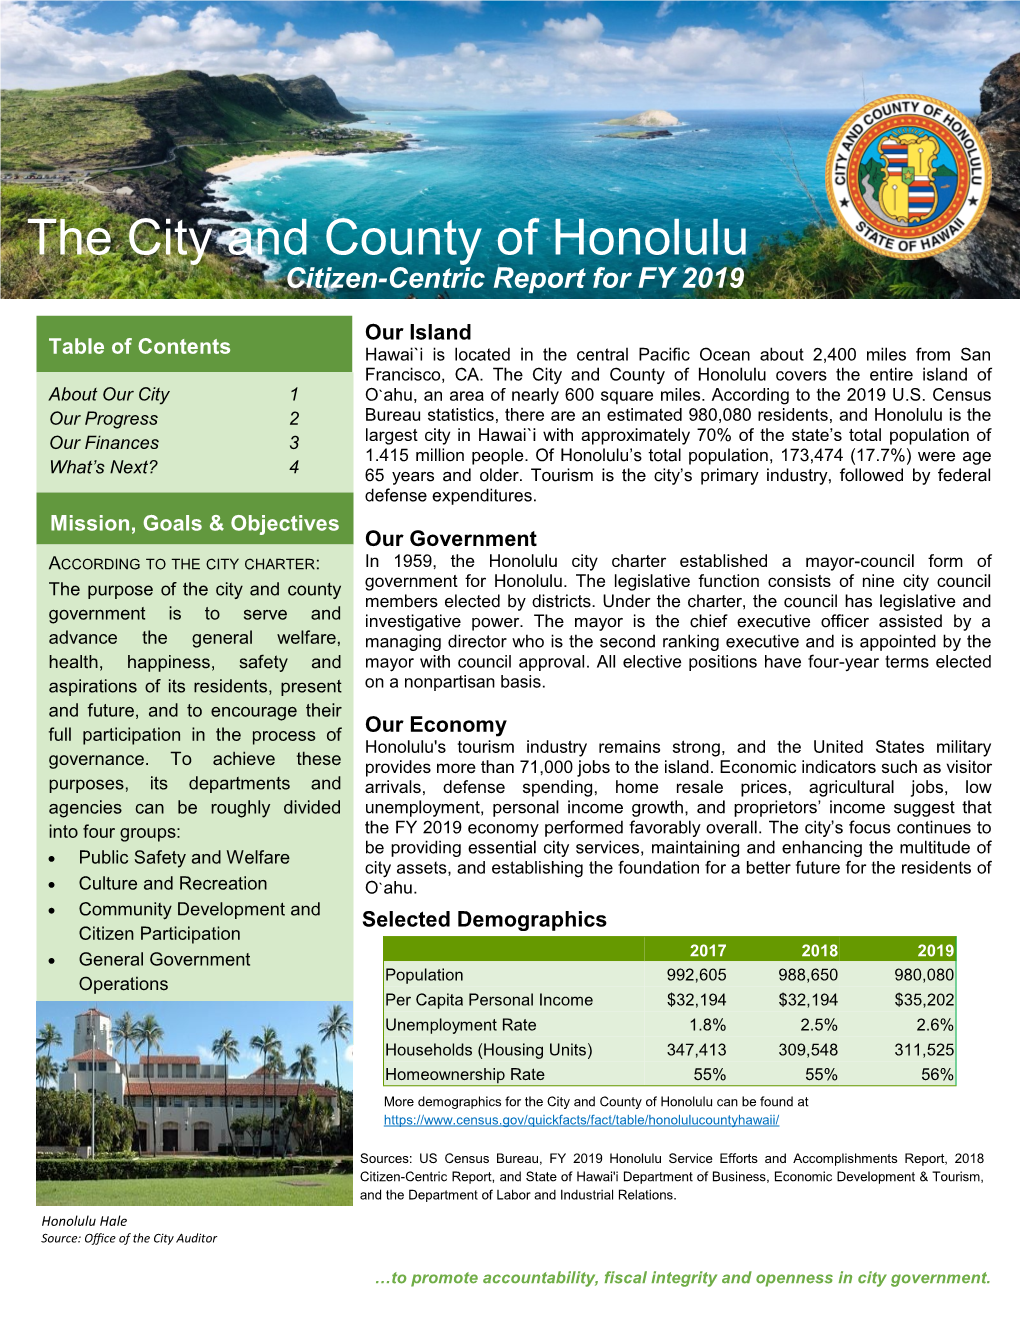 The City and County of Honolulu Citizen-Centric Report for FY 2019